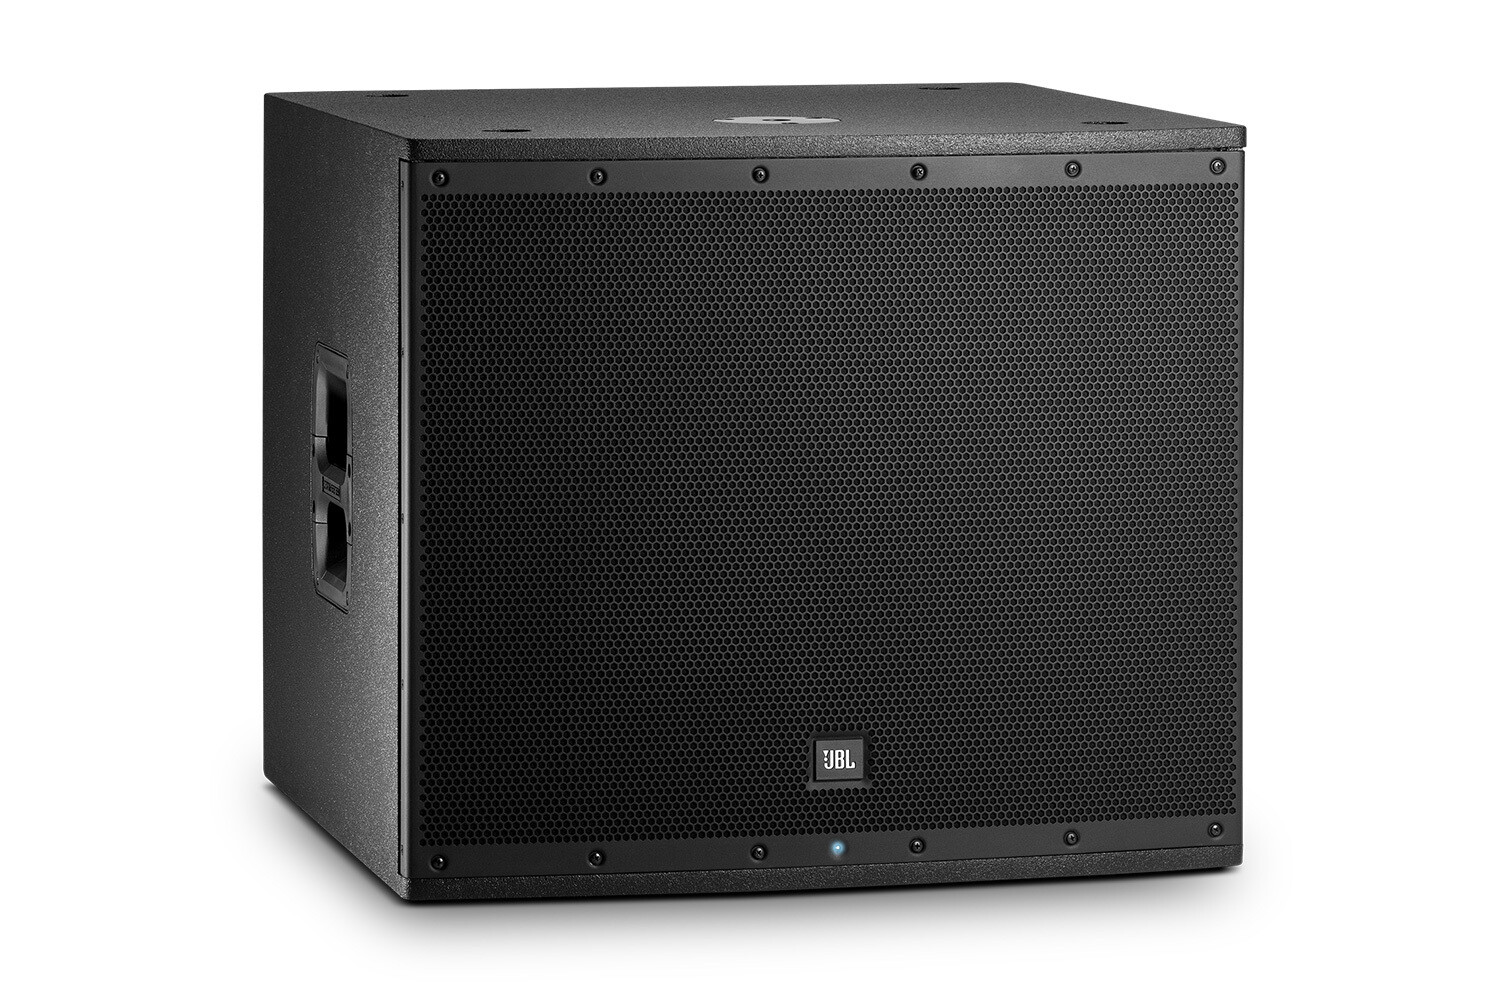 JBL EON618S 18" 1000W Powered Portable Subwoofer with Bluetooth Control
#JBEON618S MFR #EON618S